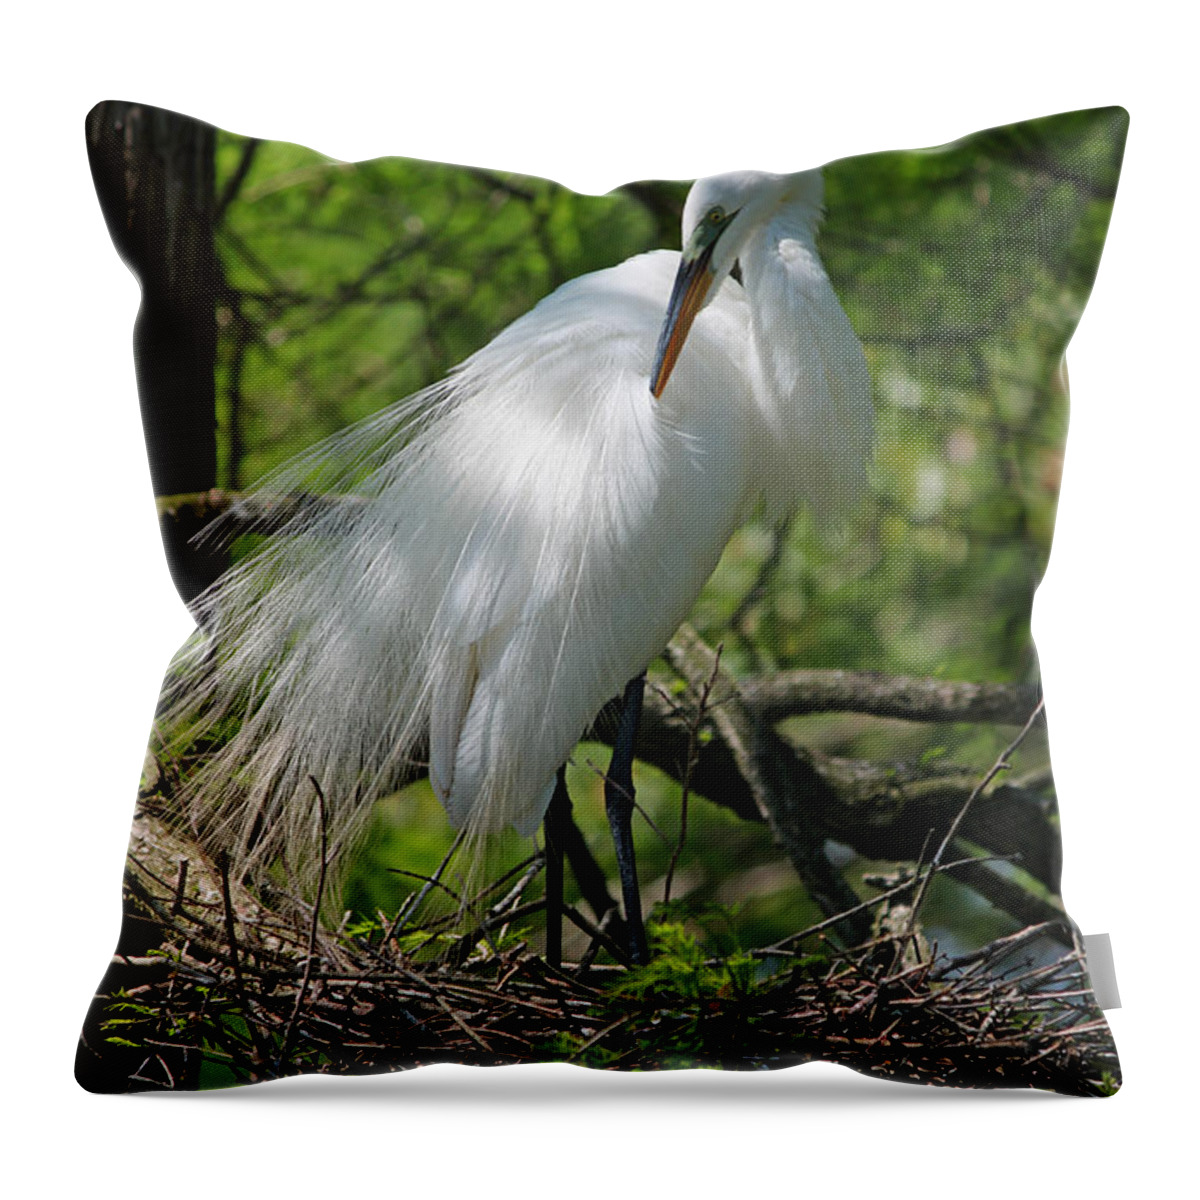 Photograph Throw Pillow featuring the photograph Great White Egret Primping by Suzanne Gaff